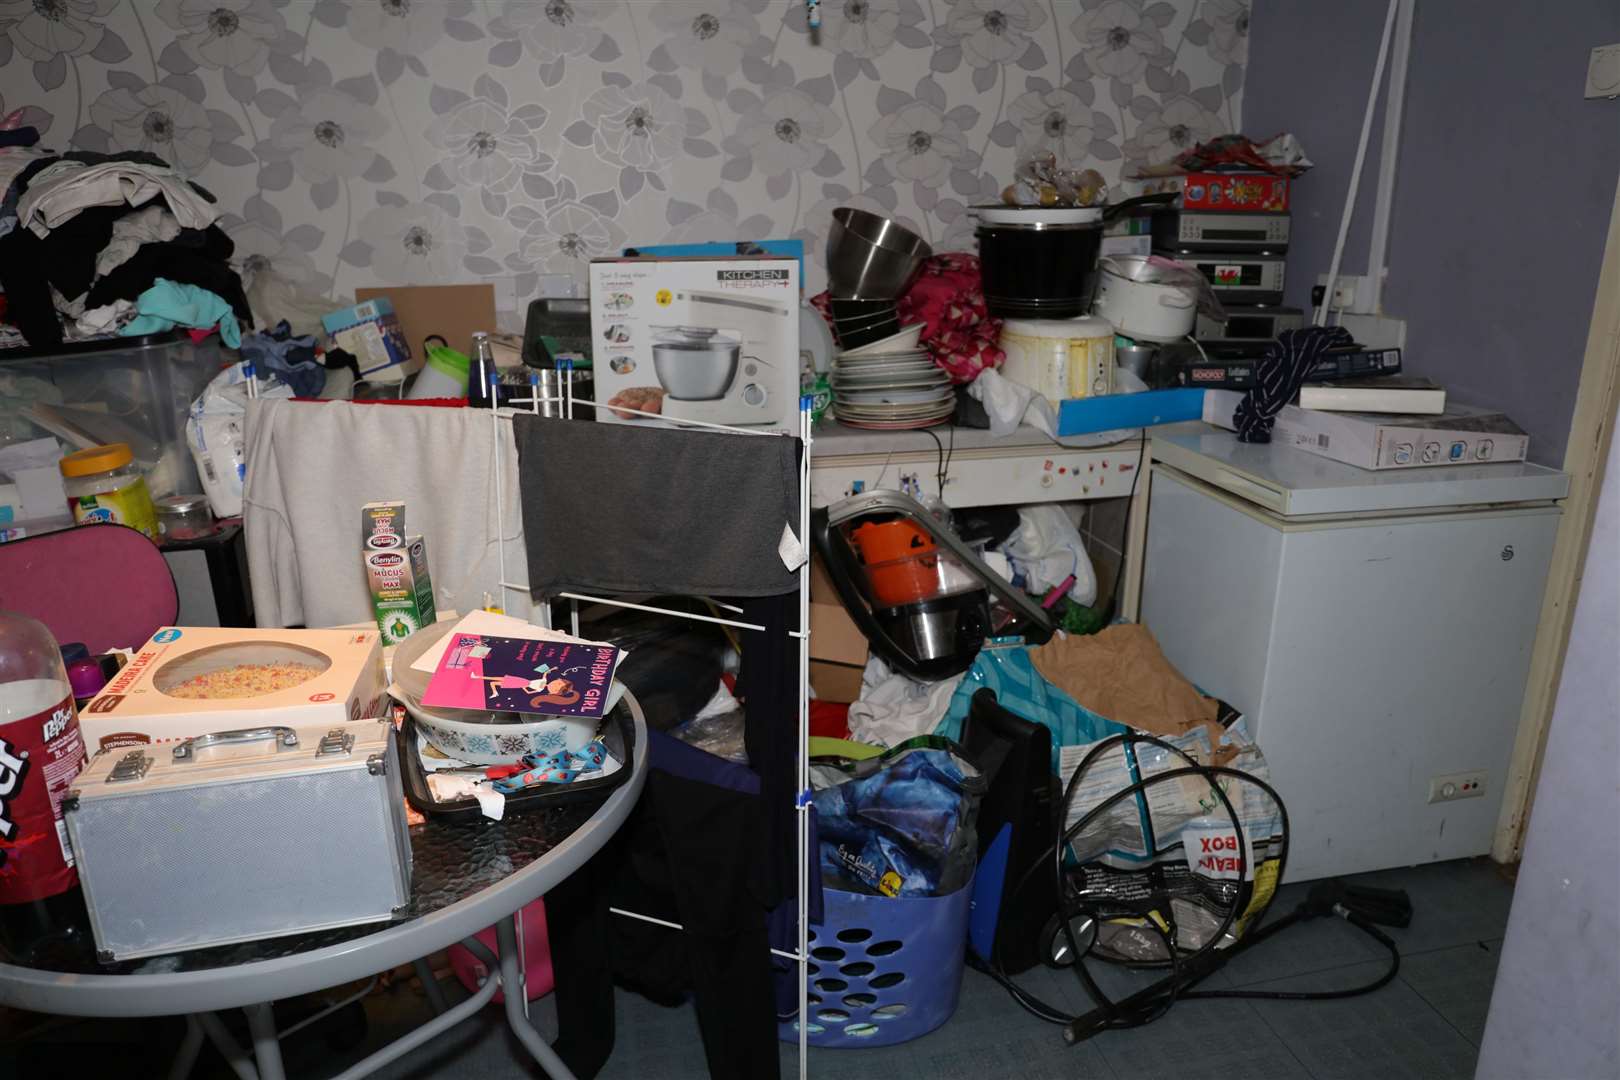 Kaylea Titford’s bedroom at her home in Newtown, Powys (Dyfed Powys Police/PA)